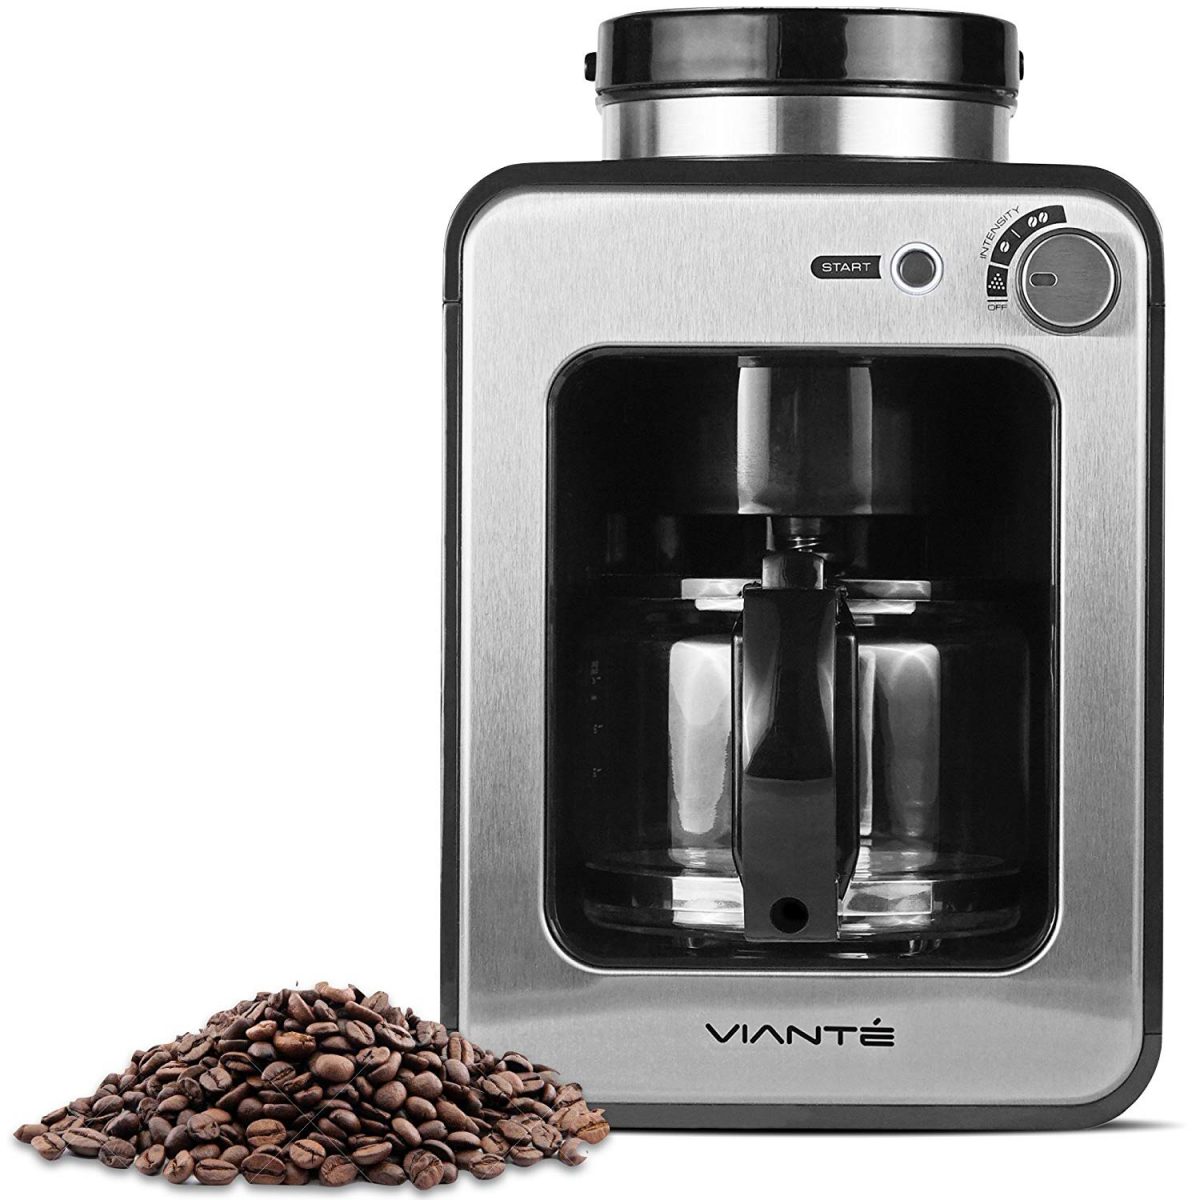 The 5 Best Grind And Brew Coffee Makers to Buy in